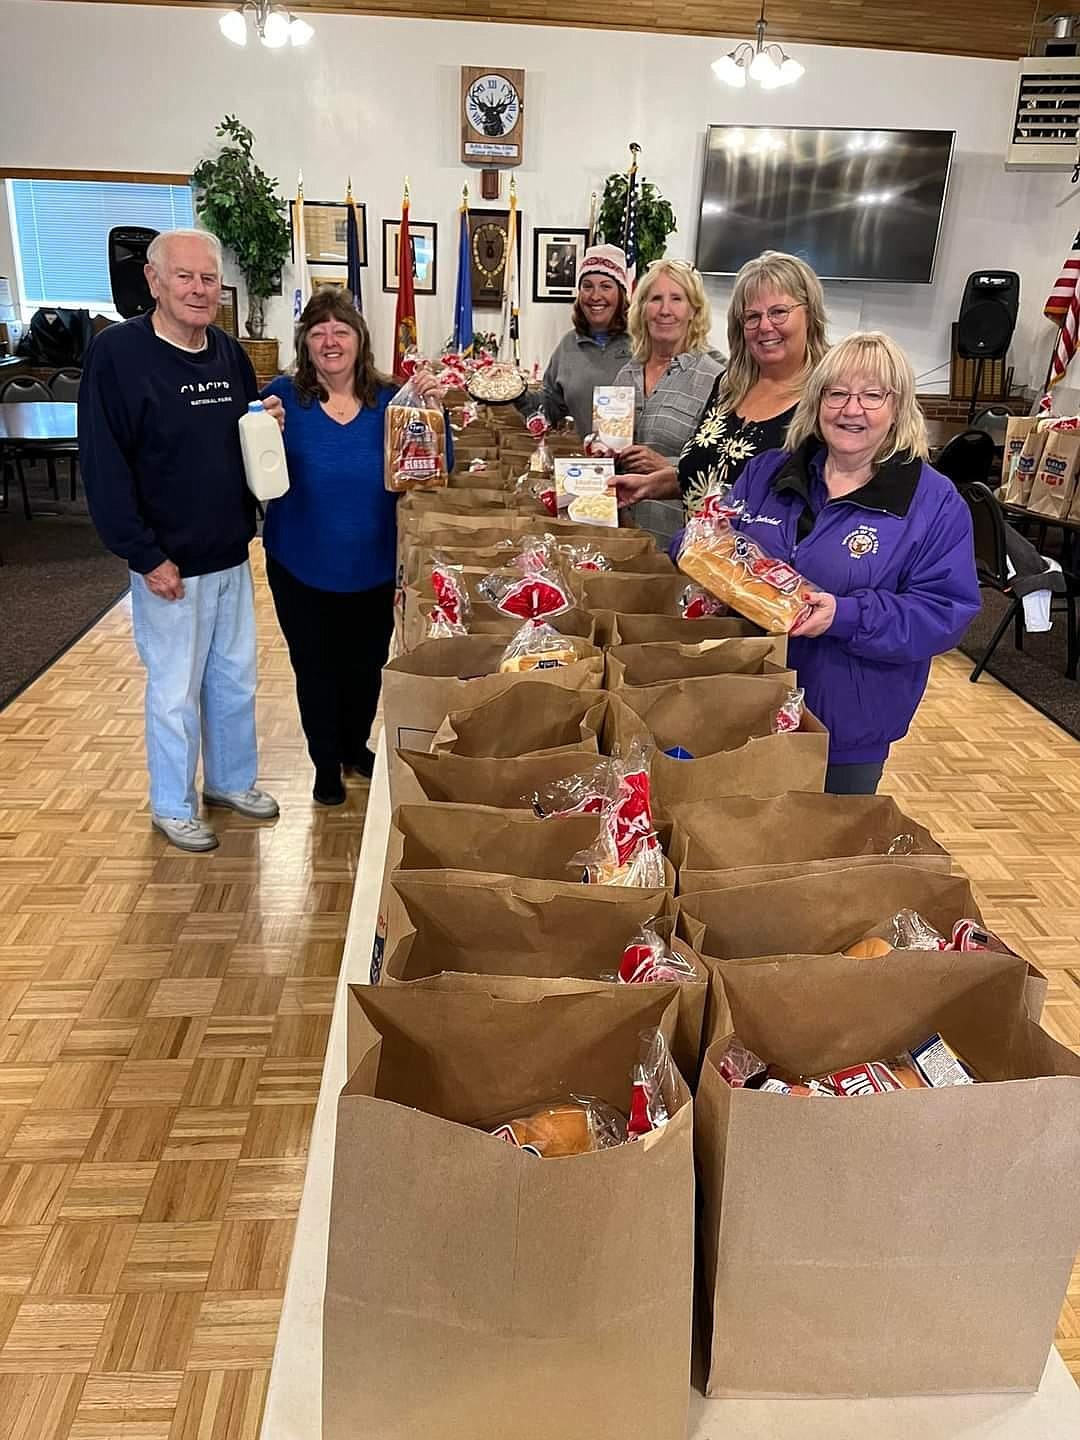 On Nov. 18, the Coeur d'Alene Elks No. 1254, in cooperation with Fostering Idaho, gave out complete Thanksgiving meals to 87 foster families in the area. From left: Dick Gardner, Rene Johnson, Erica Balch, Lisa Jasmin, coordinator Sandy Wessling and Debbi Nadrchal. Elks volunteers not pictured include Bob Shaw, Karen Magner and Cliff Shove.